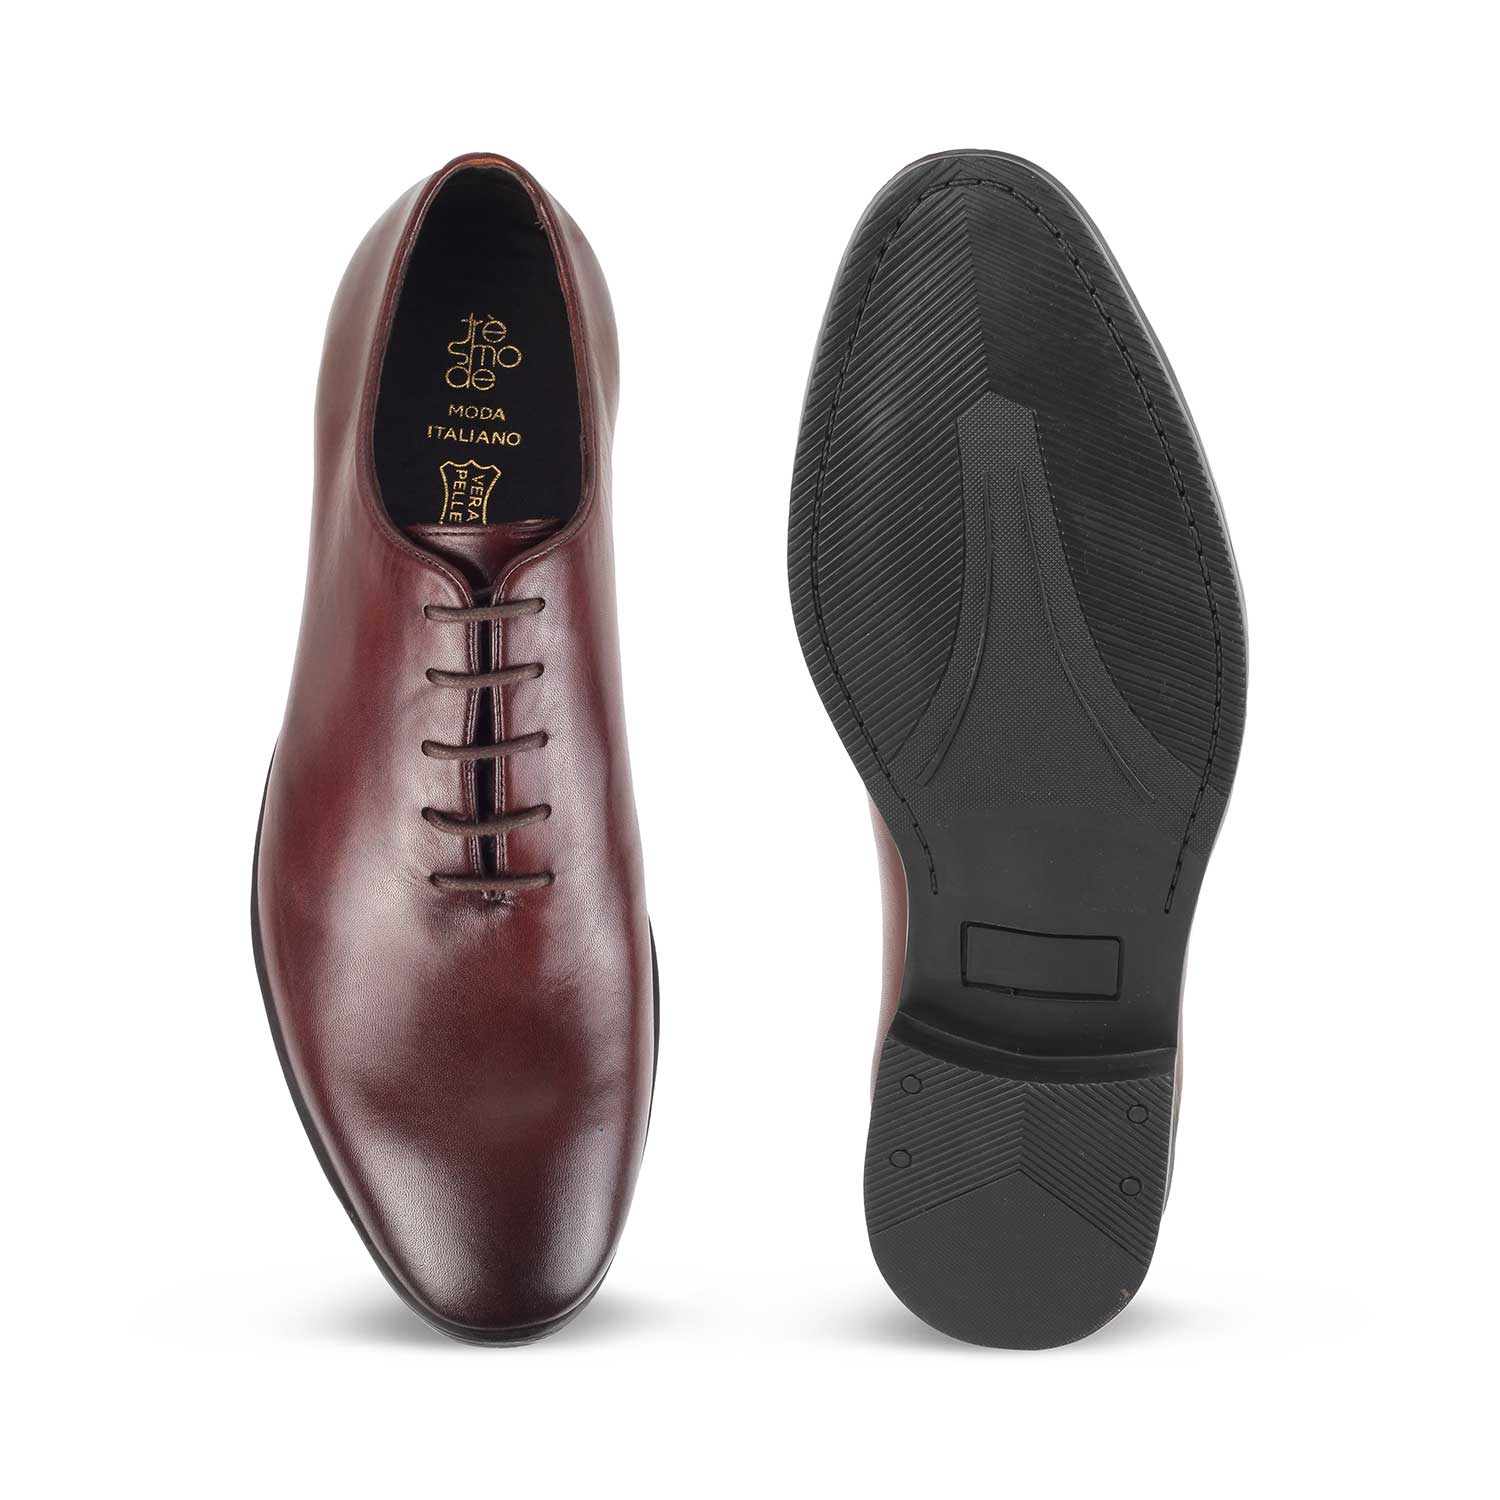 Coxford Brown Men's Leather Lace Ups Online at Tresmode.com